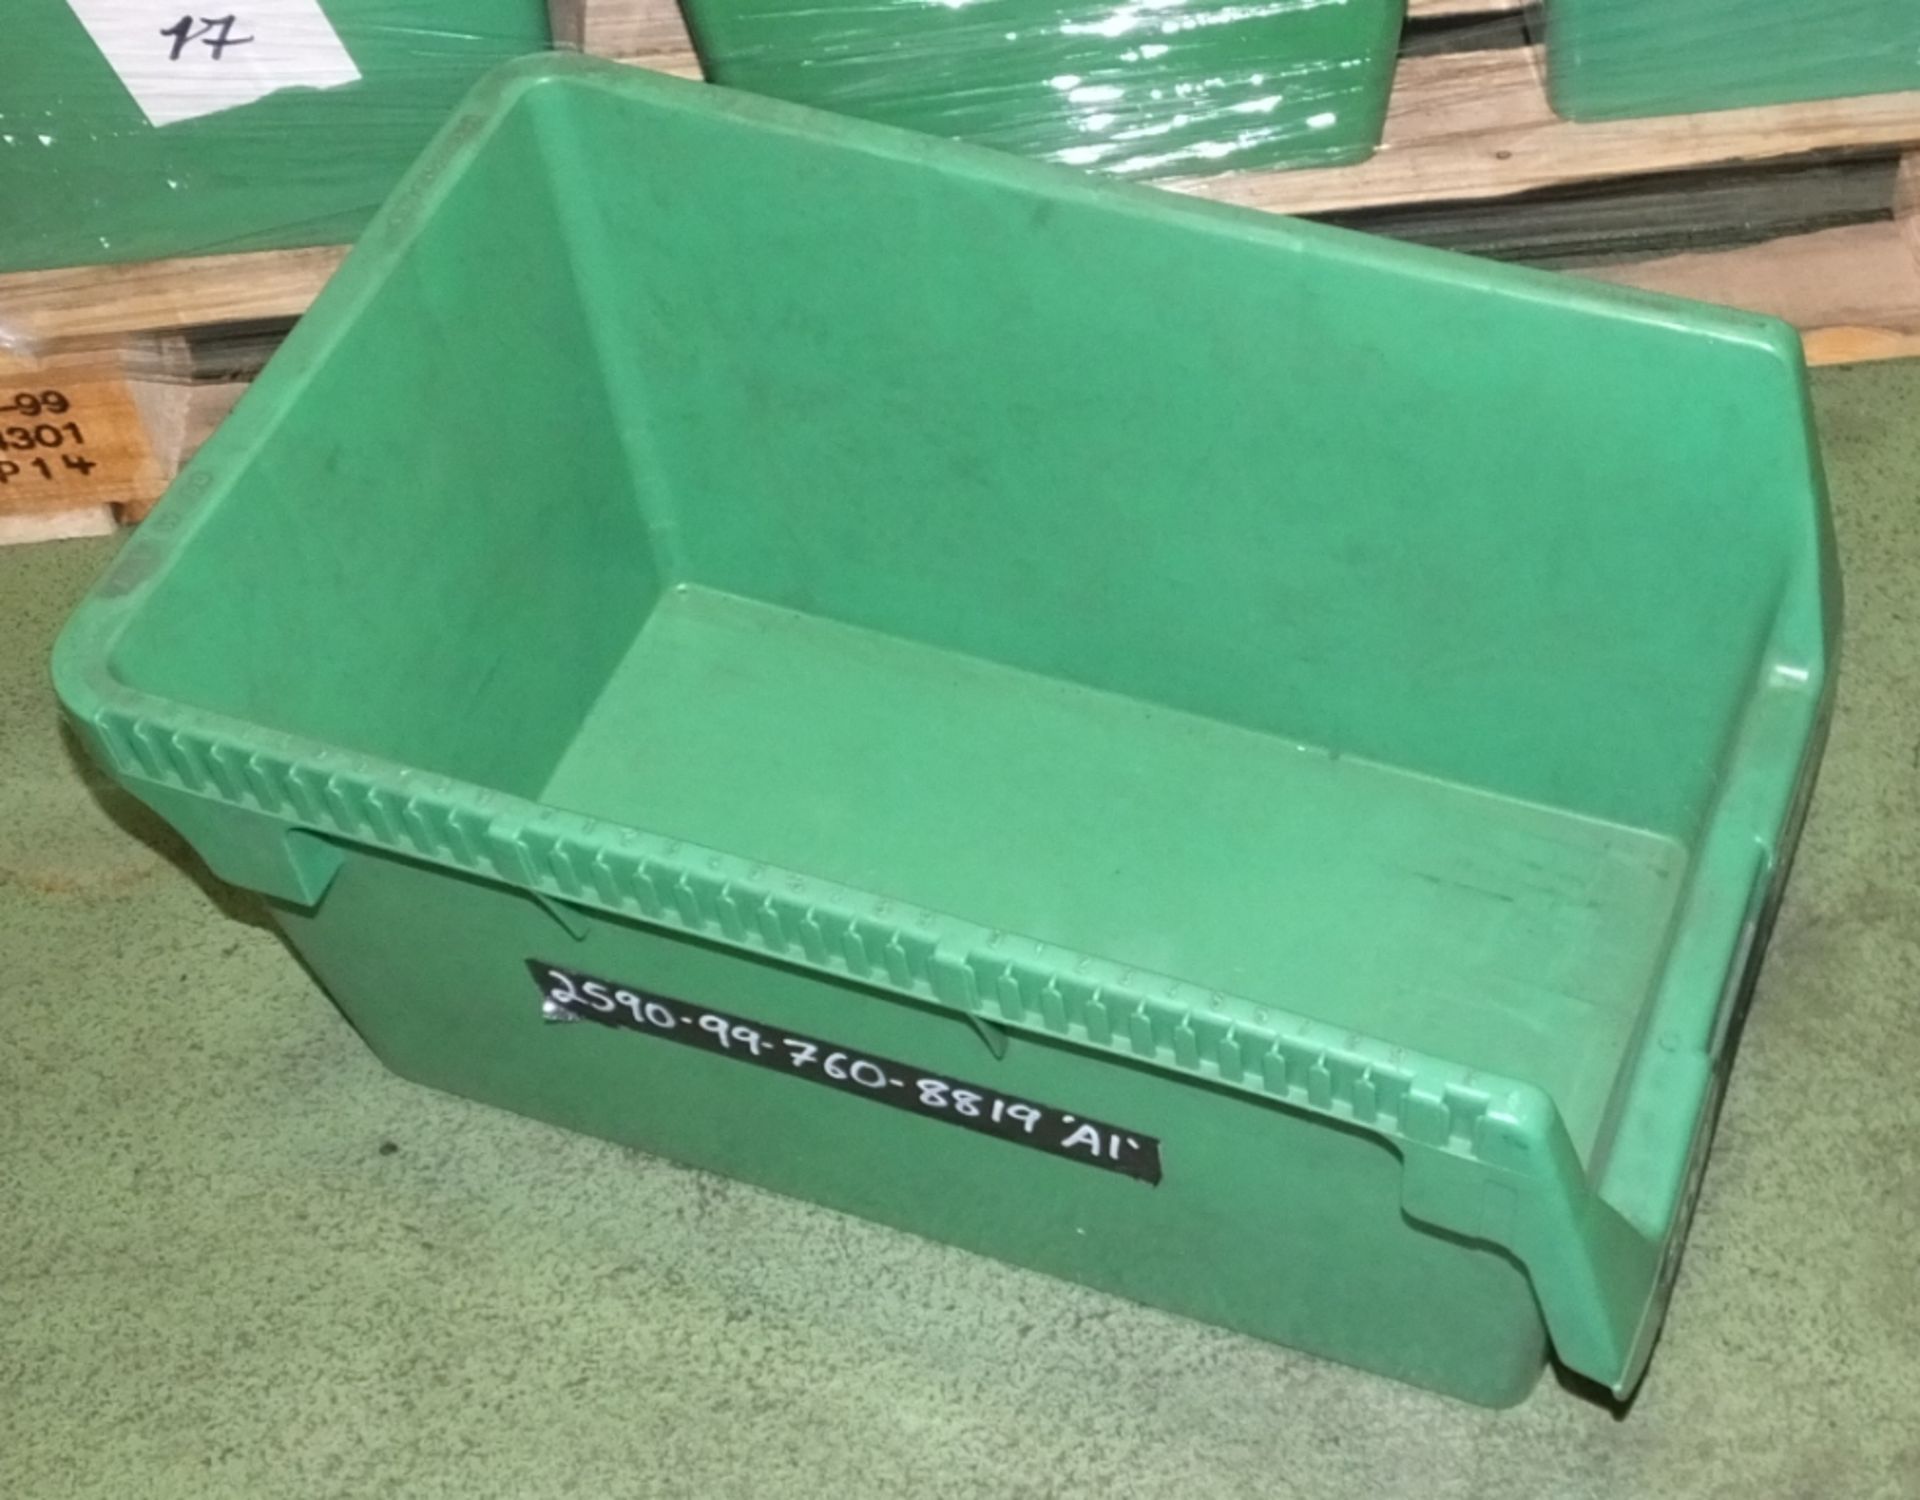 85x Plastic storage bins / trays - non stackable - Image 2 of 2